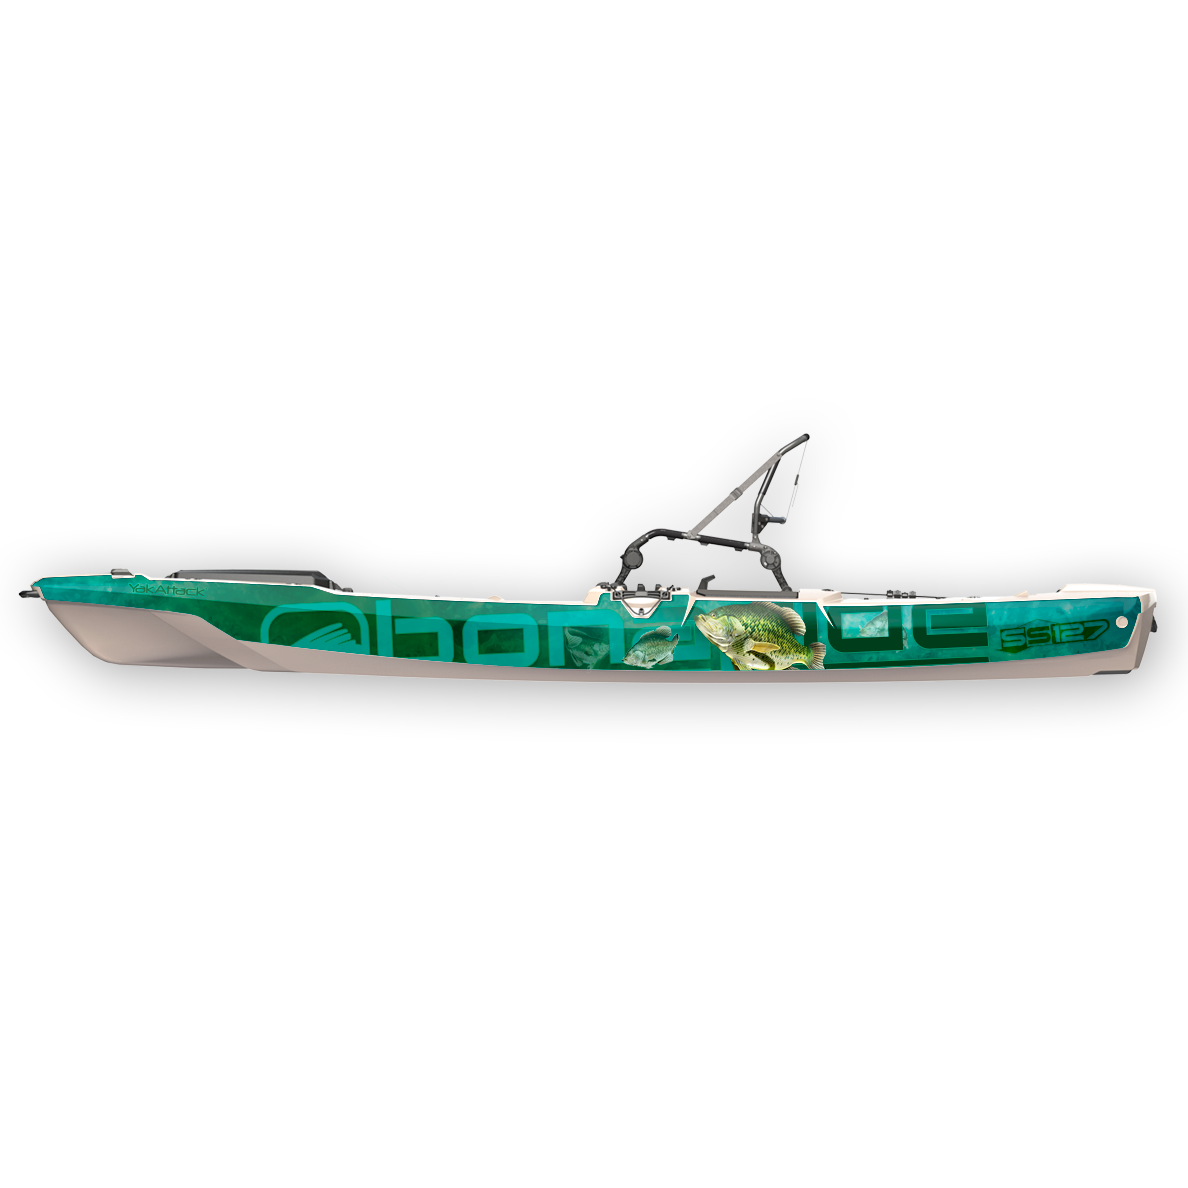 Custom Kayak Name Decal, Canoe Decals, Decals for Paddleboard, Personalized  Kayak Vinyl Decal, Boat Name Decal, Water Vessel Decals 